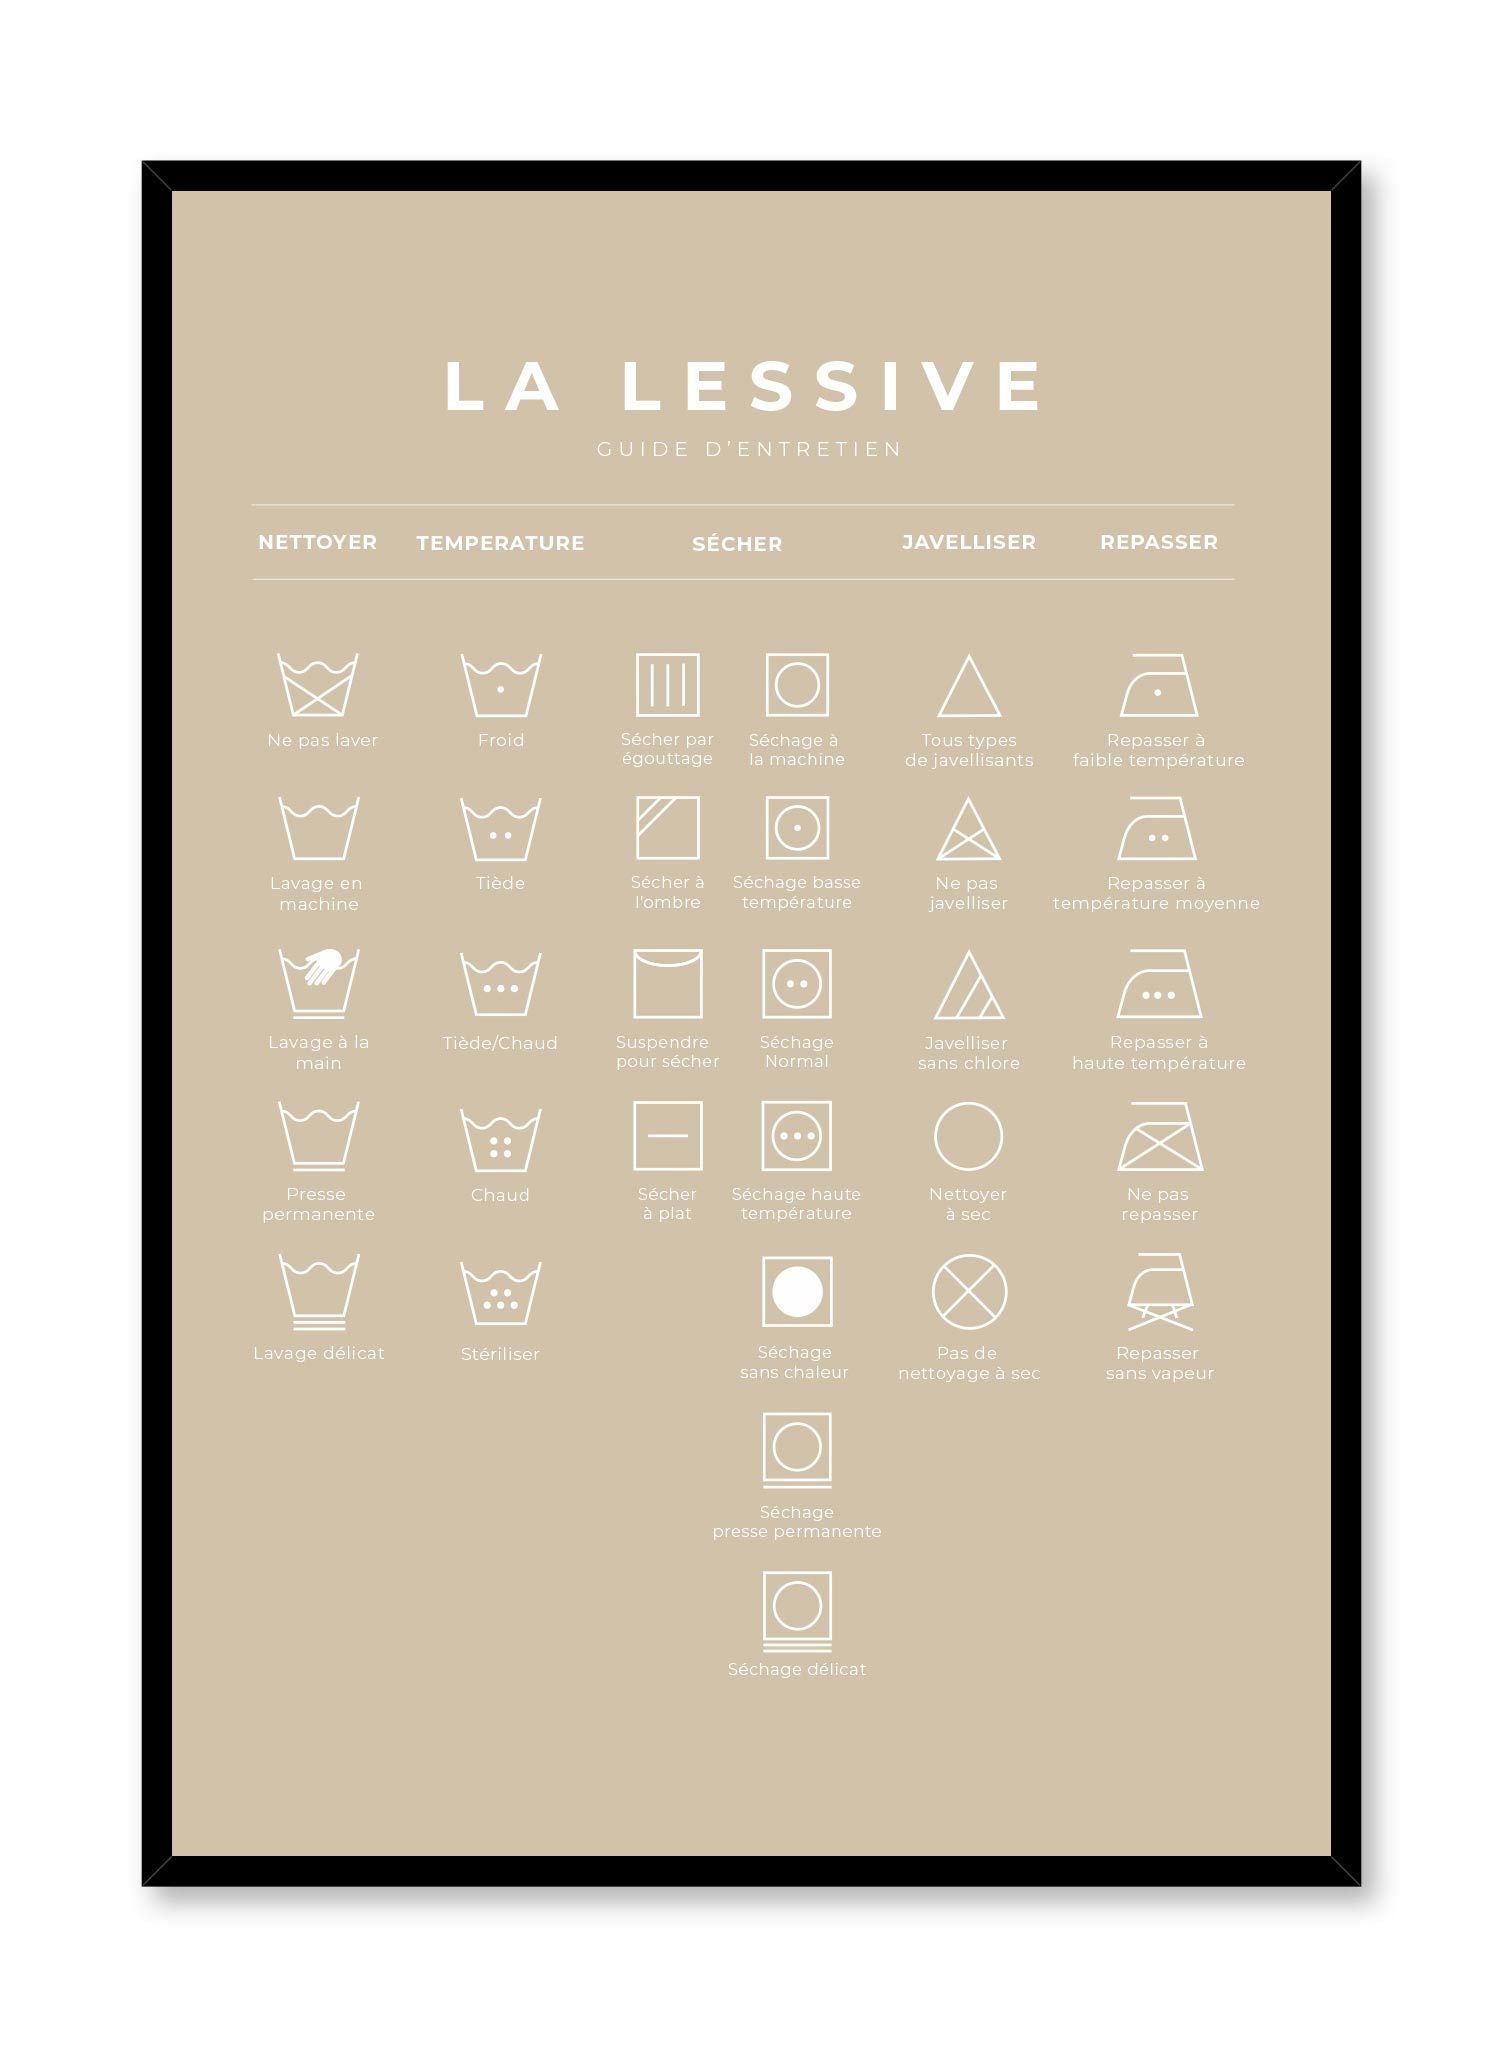 Laundry Guide in French and Beige is a mnimalist typography by Opposite Wall of a chart of laundry symbols and their meaning. 